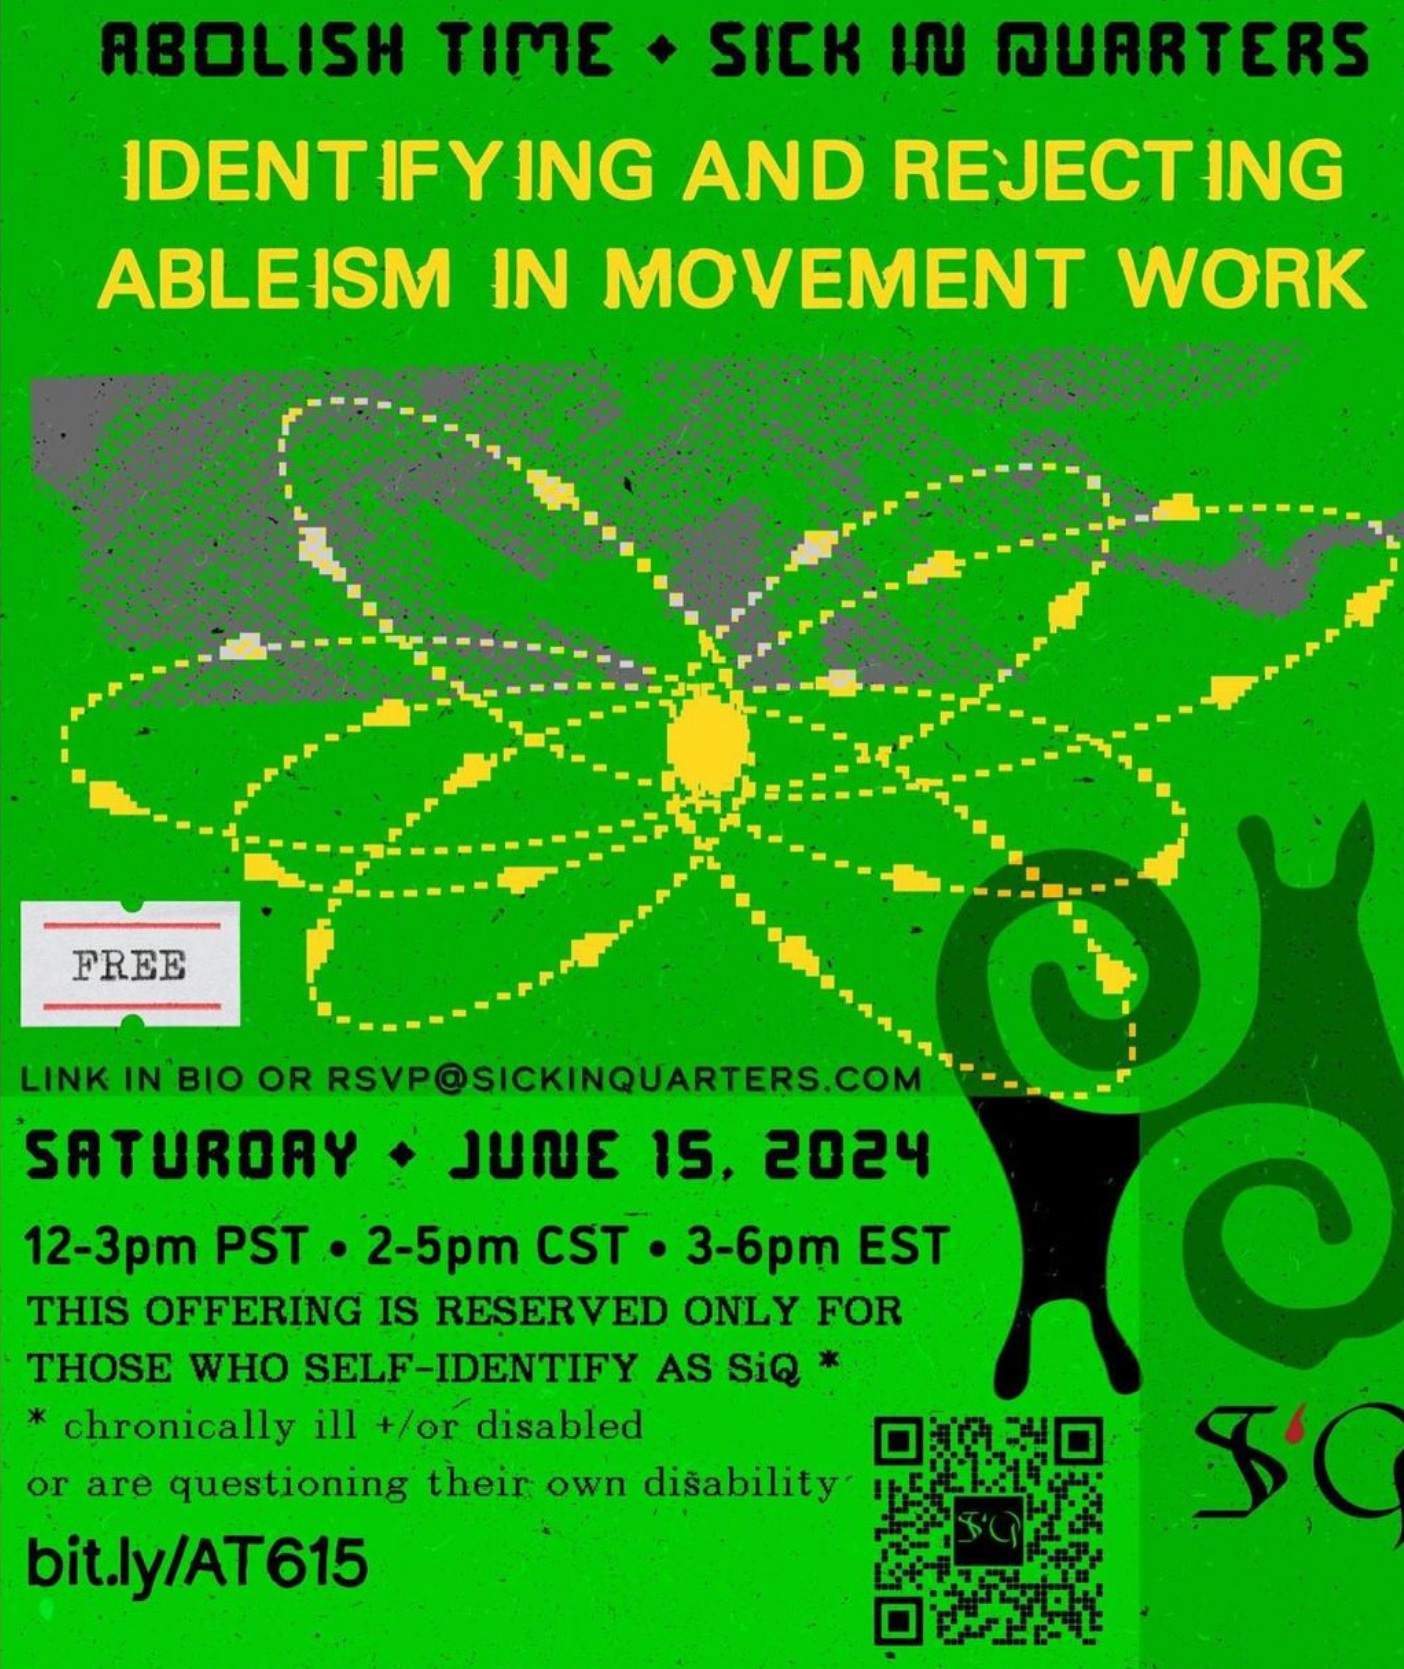 event announcement graphic poster with a natural paper textured neon grass green background and bold text. Along the top edge is a folder tab shape with the word ‘DEPROGRAMMING’ as the label. From top to bottom reads : [black, all caps] ABOLISH TIME ◆ [diamond emoji] SICK IN QUARTERS [new line, yellow] IDENTIFYING AND REJECTING ABLEISM IN MOVEMENT WORK [bottom left corner, small black text, all caps] LINK IN BIO OR RSVP@SICKINQUARTERS.COM [new line] SATURDAY ◆ [diamond emoticon] JUNE 15, 2024 [new line] 12-3pm PST • [dot emoticon] 2-5pm CST • [dot emoticon] 3-6pm EST [new line] THIS OFFERING IS RESERVED ONLY FOR THOSE WHO SELF-IDENTIFY AS SIQ * [new line] * chronically ill +/or disabled or are questioning their own disability [new line] bit.ly/AT615 [end text].  In the center of the image is a yellow and cream pixelated neutron graphic composed of repeating oblong sweeping oval shapes meeting at a center point, layered overtop of a grey indistinct pixelated swirl pattern. Nested under the left corner of this graphic is a small white ticket graphic with thin red borders horizontally surrounded the word ‘FREE’ in black stamp-style text. To the right is a larger black graphic of two reversed spirals, with their upper quadrants almost resembling snails’ heads. Underneath is a QR code that leads to the RSVP form when scanned, and the SiQ logo with the capital S and Q in black gothic font and the lowercase letter i in dark red resembling a blood droplet.